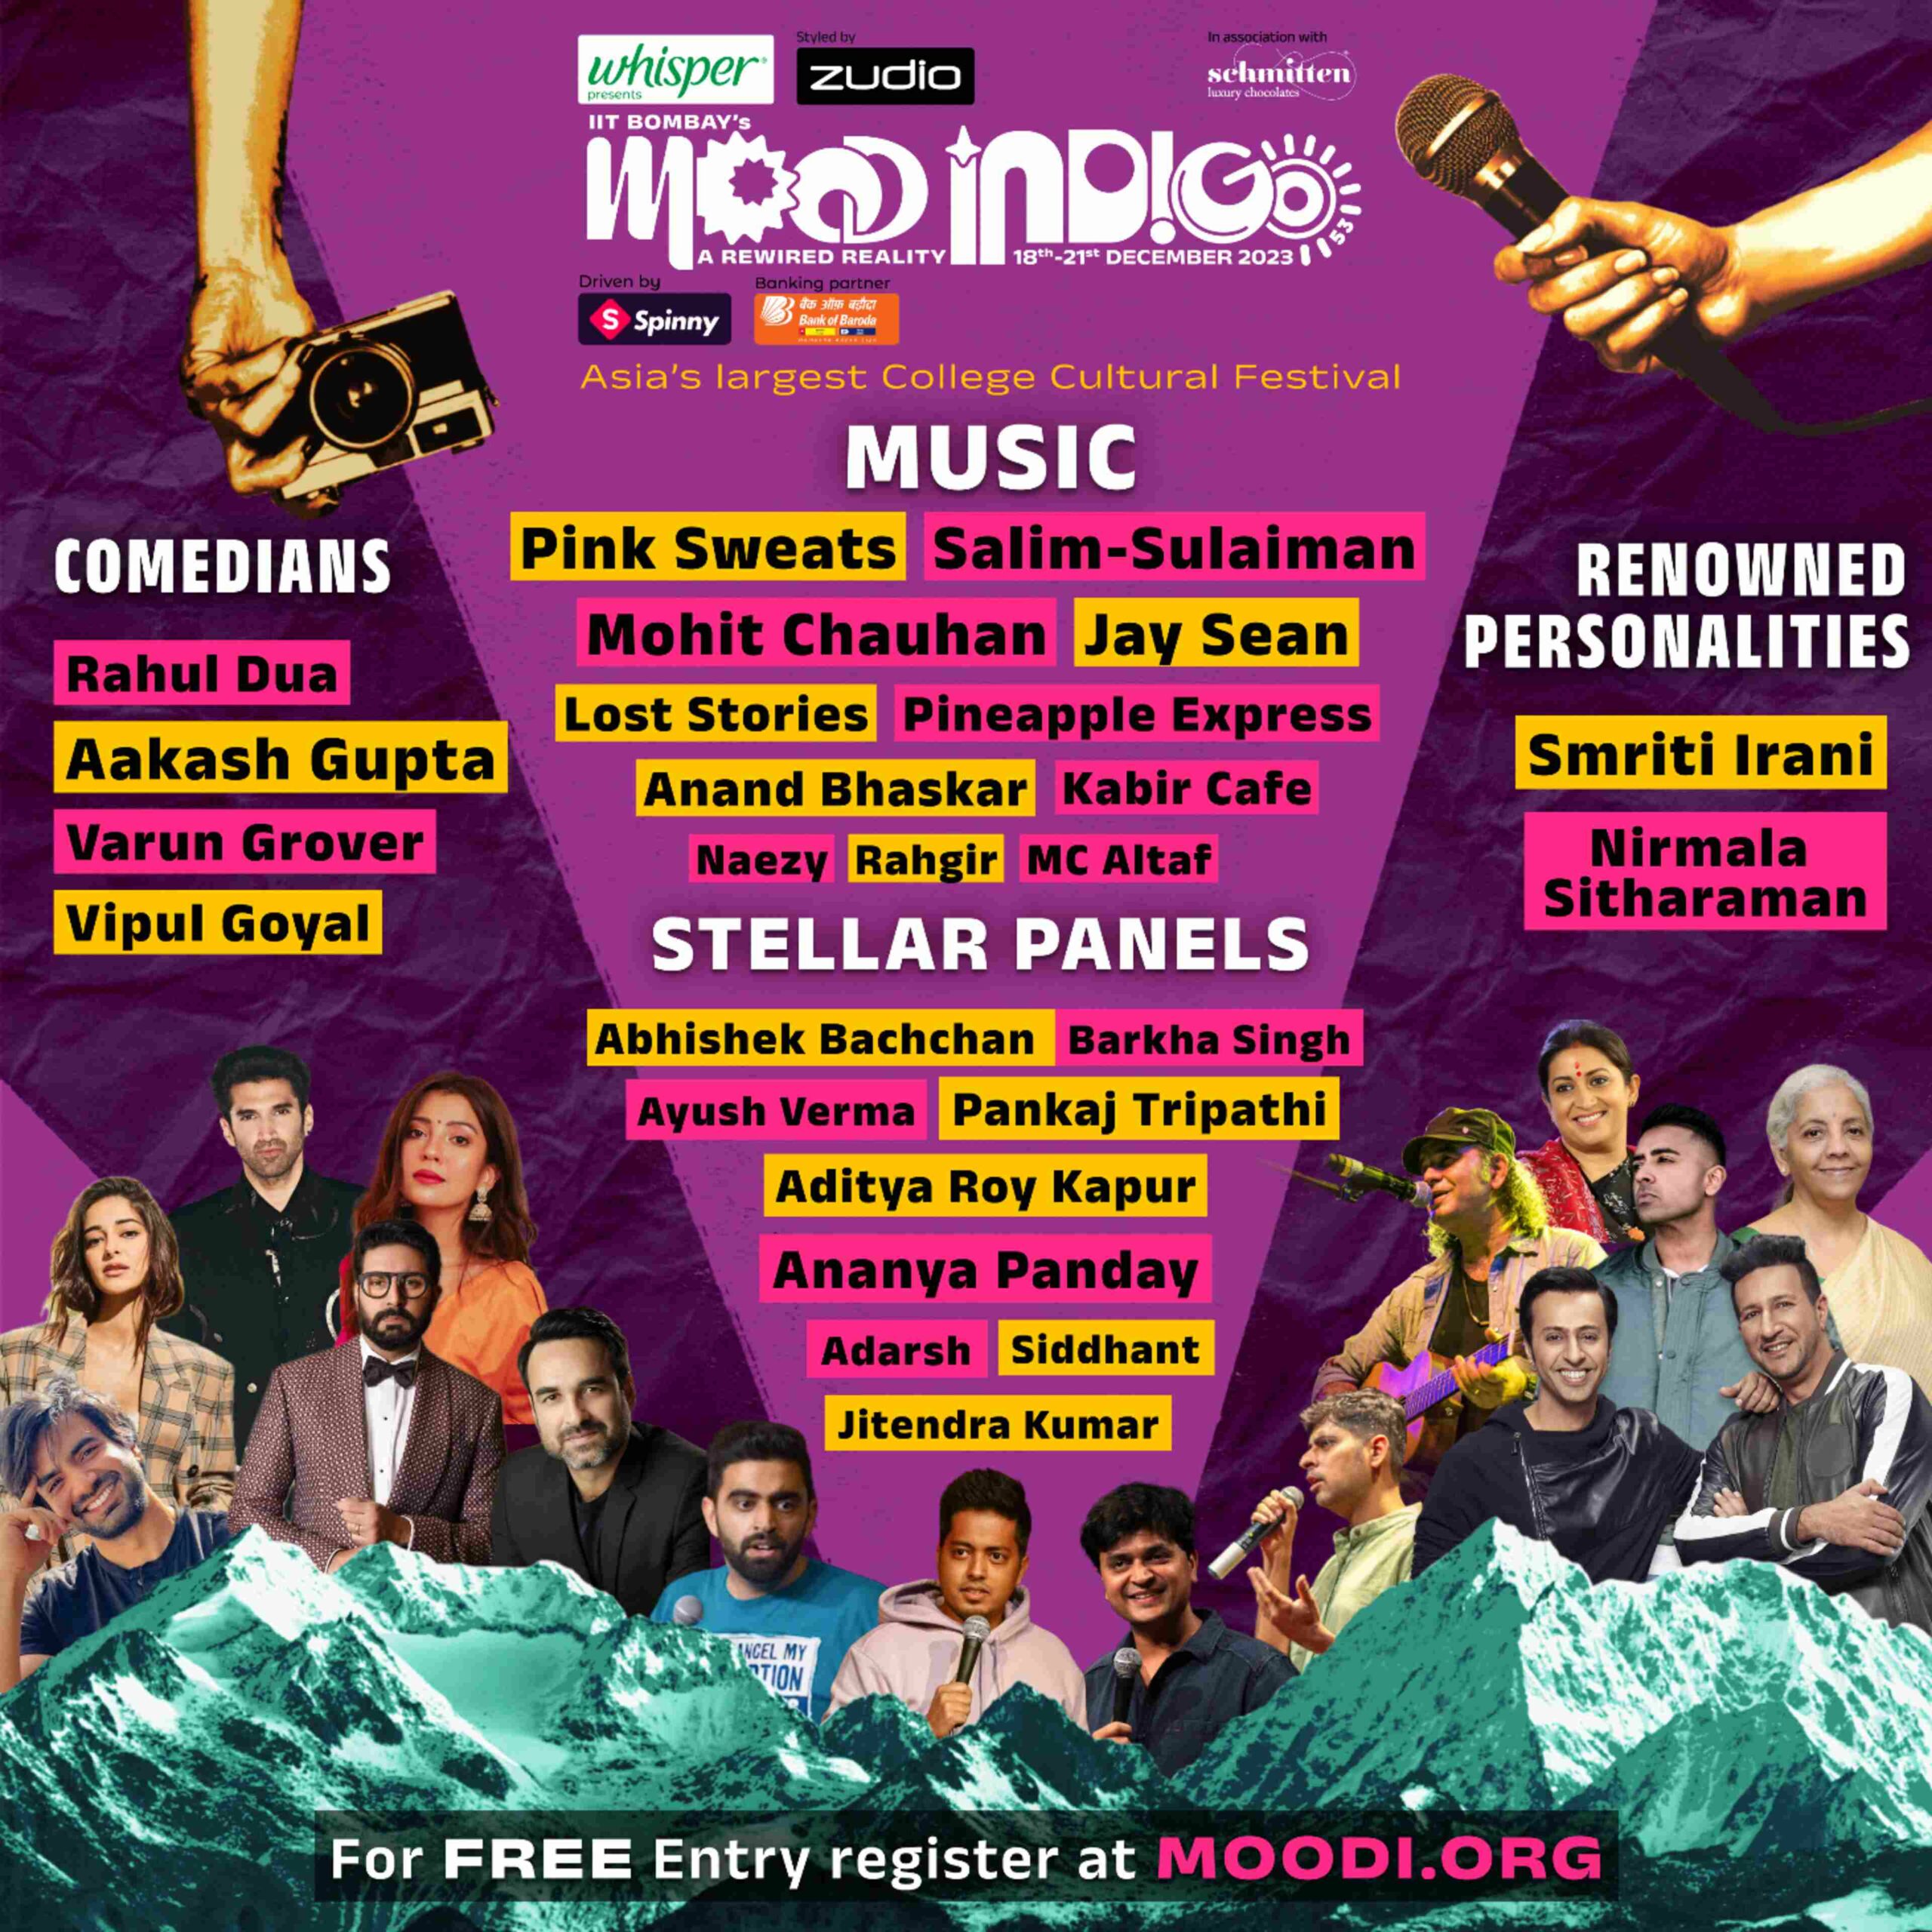 IIT Bombay’s Mood Indigo reveals spectacular line up for the biggest event of the year